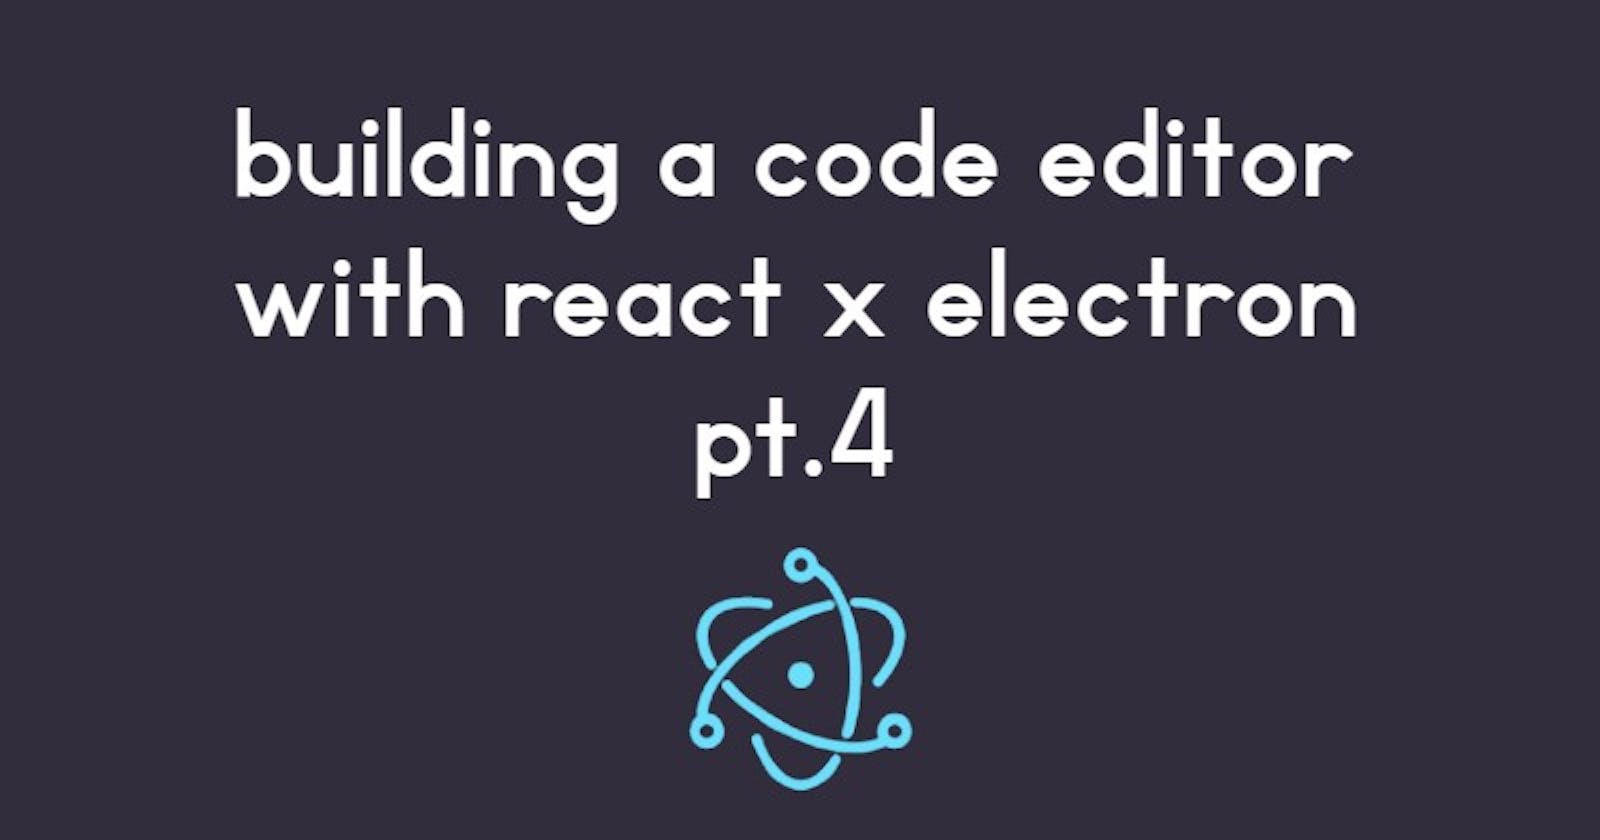 Building a react x electron code editor pt.4 - performance: memoizing and virtualization